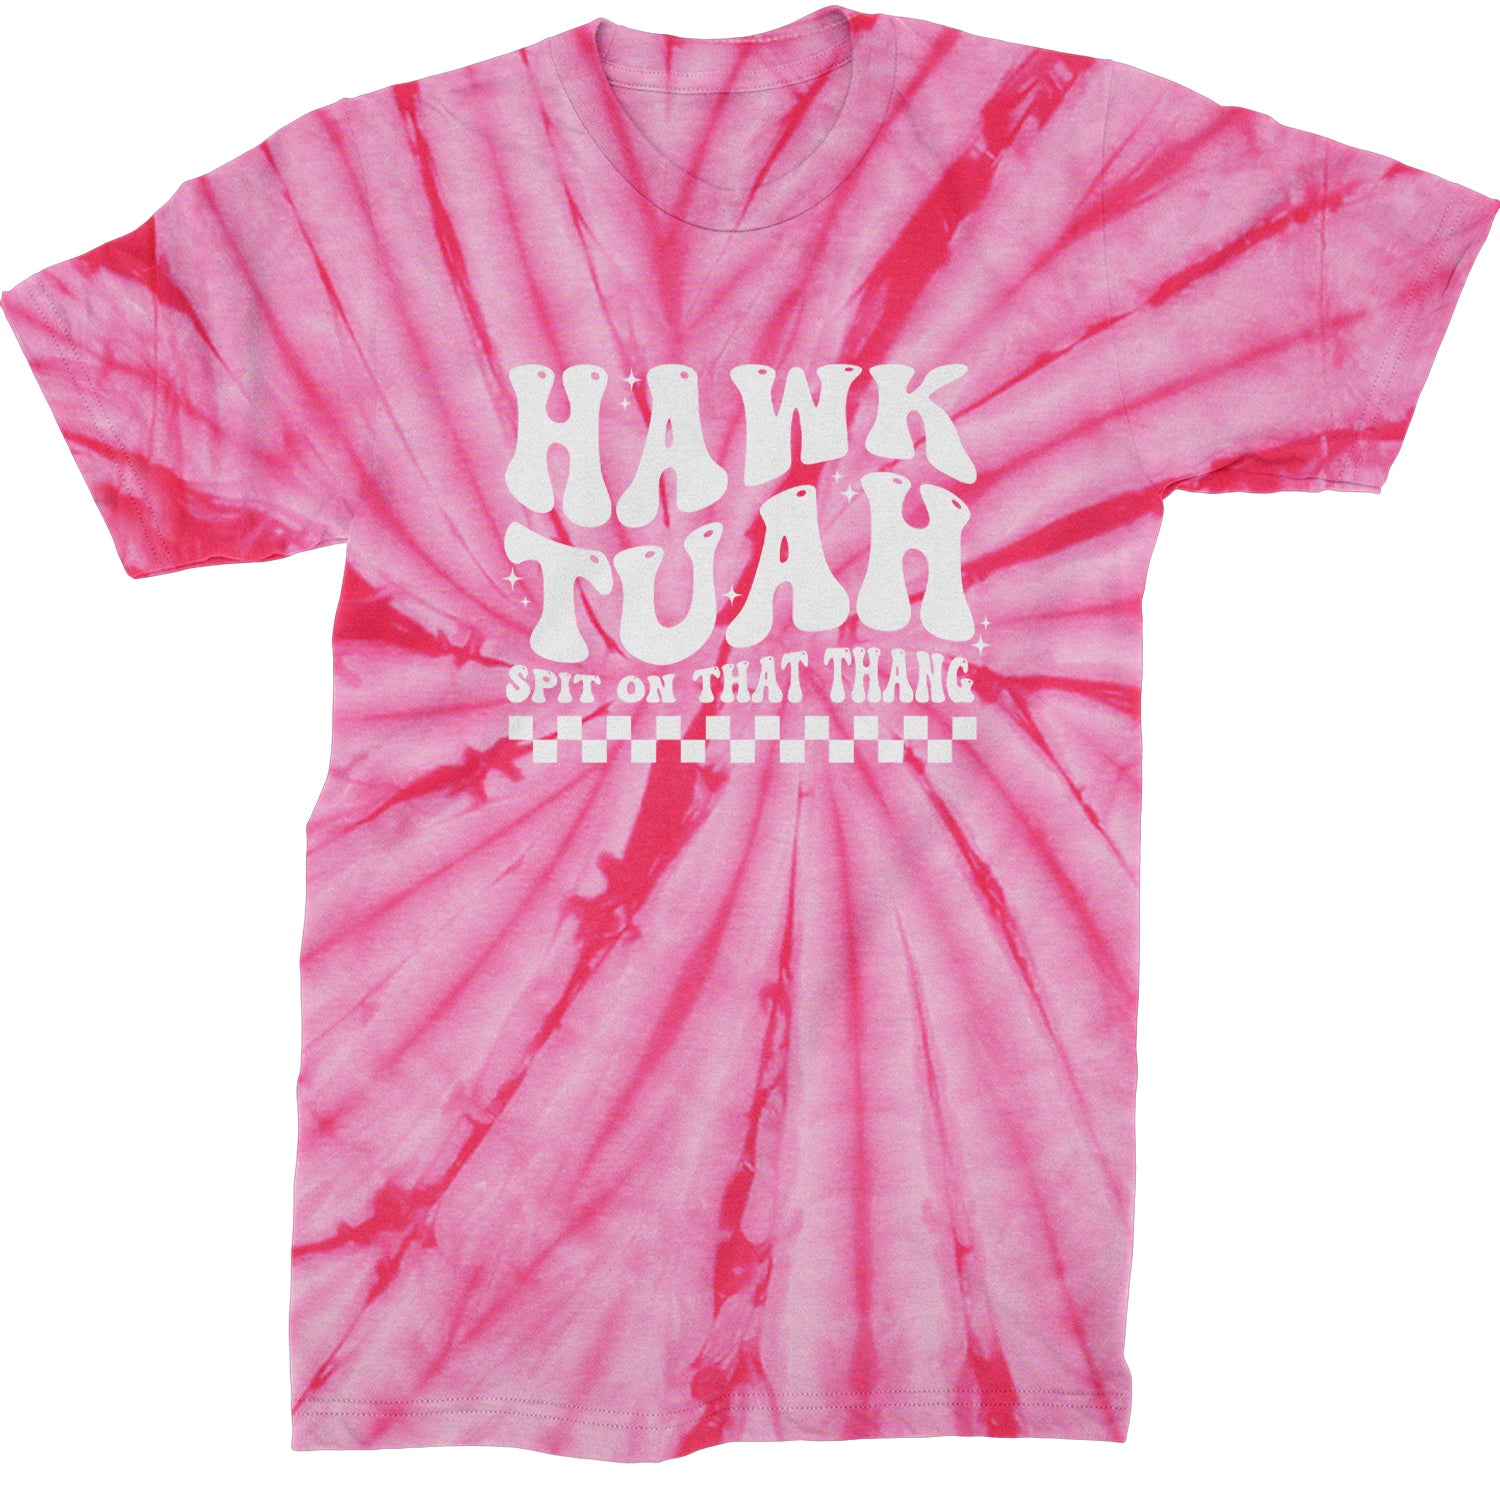 Hawk Tuah Spit On That Thang Mens T-shirt Tie-Dye Spider Pink